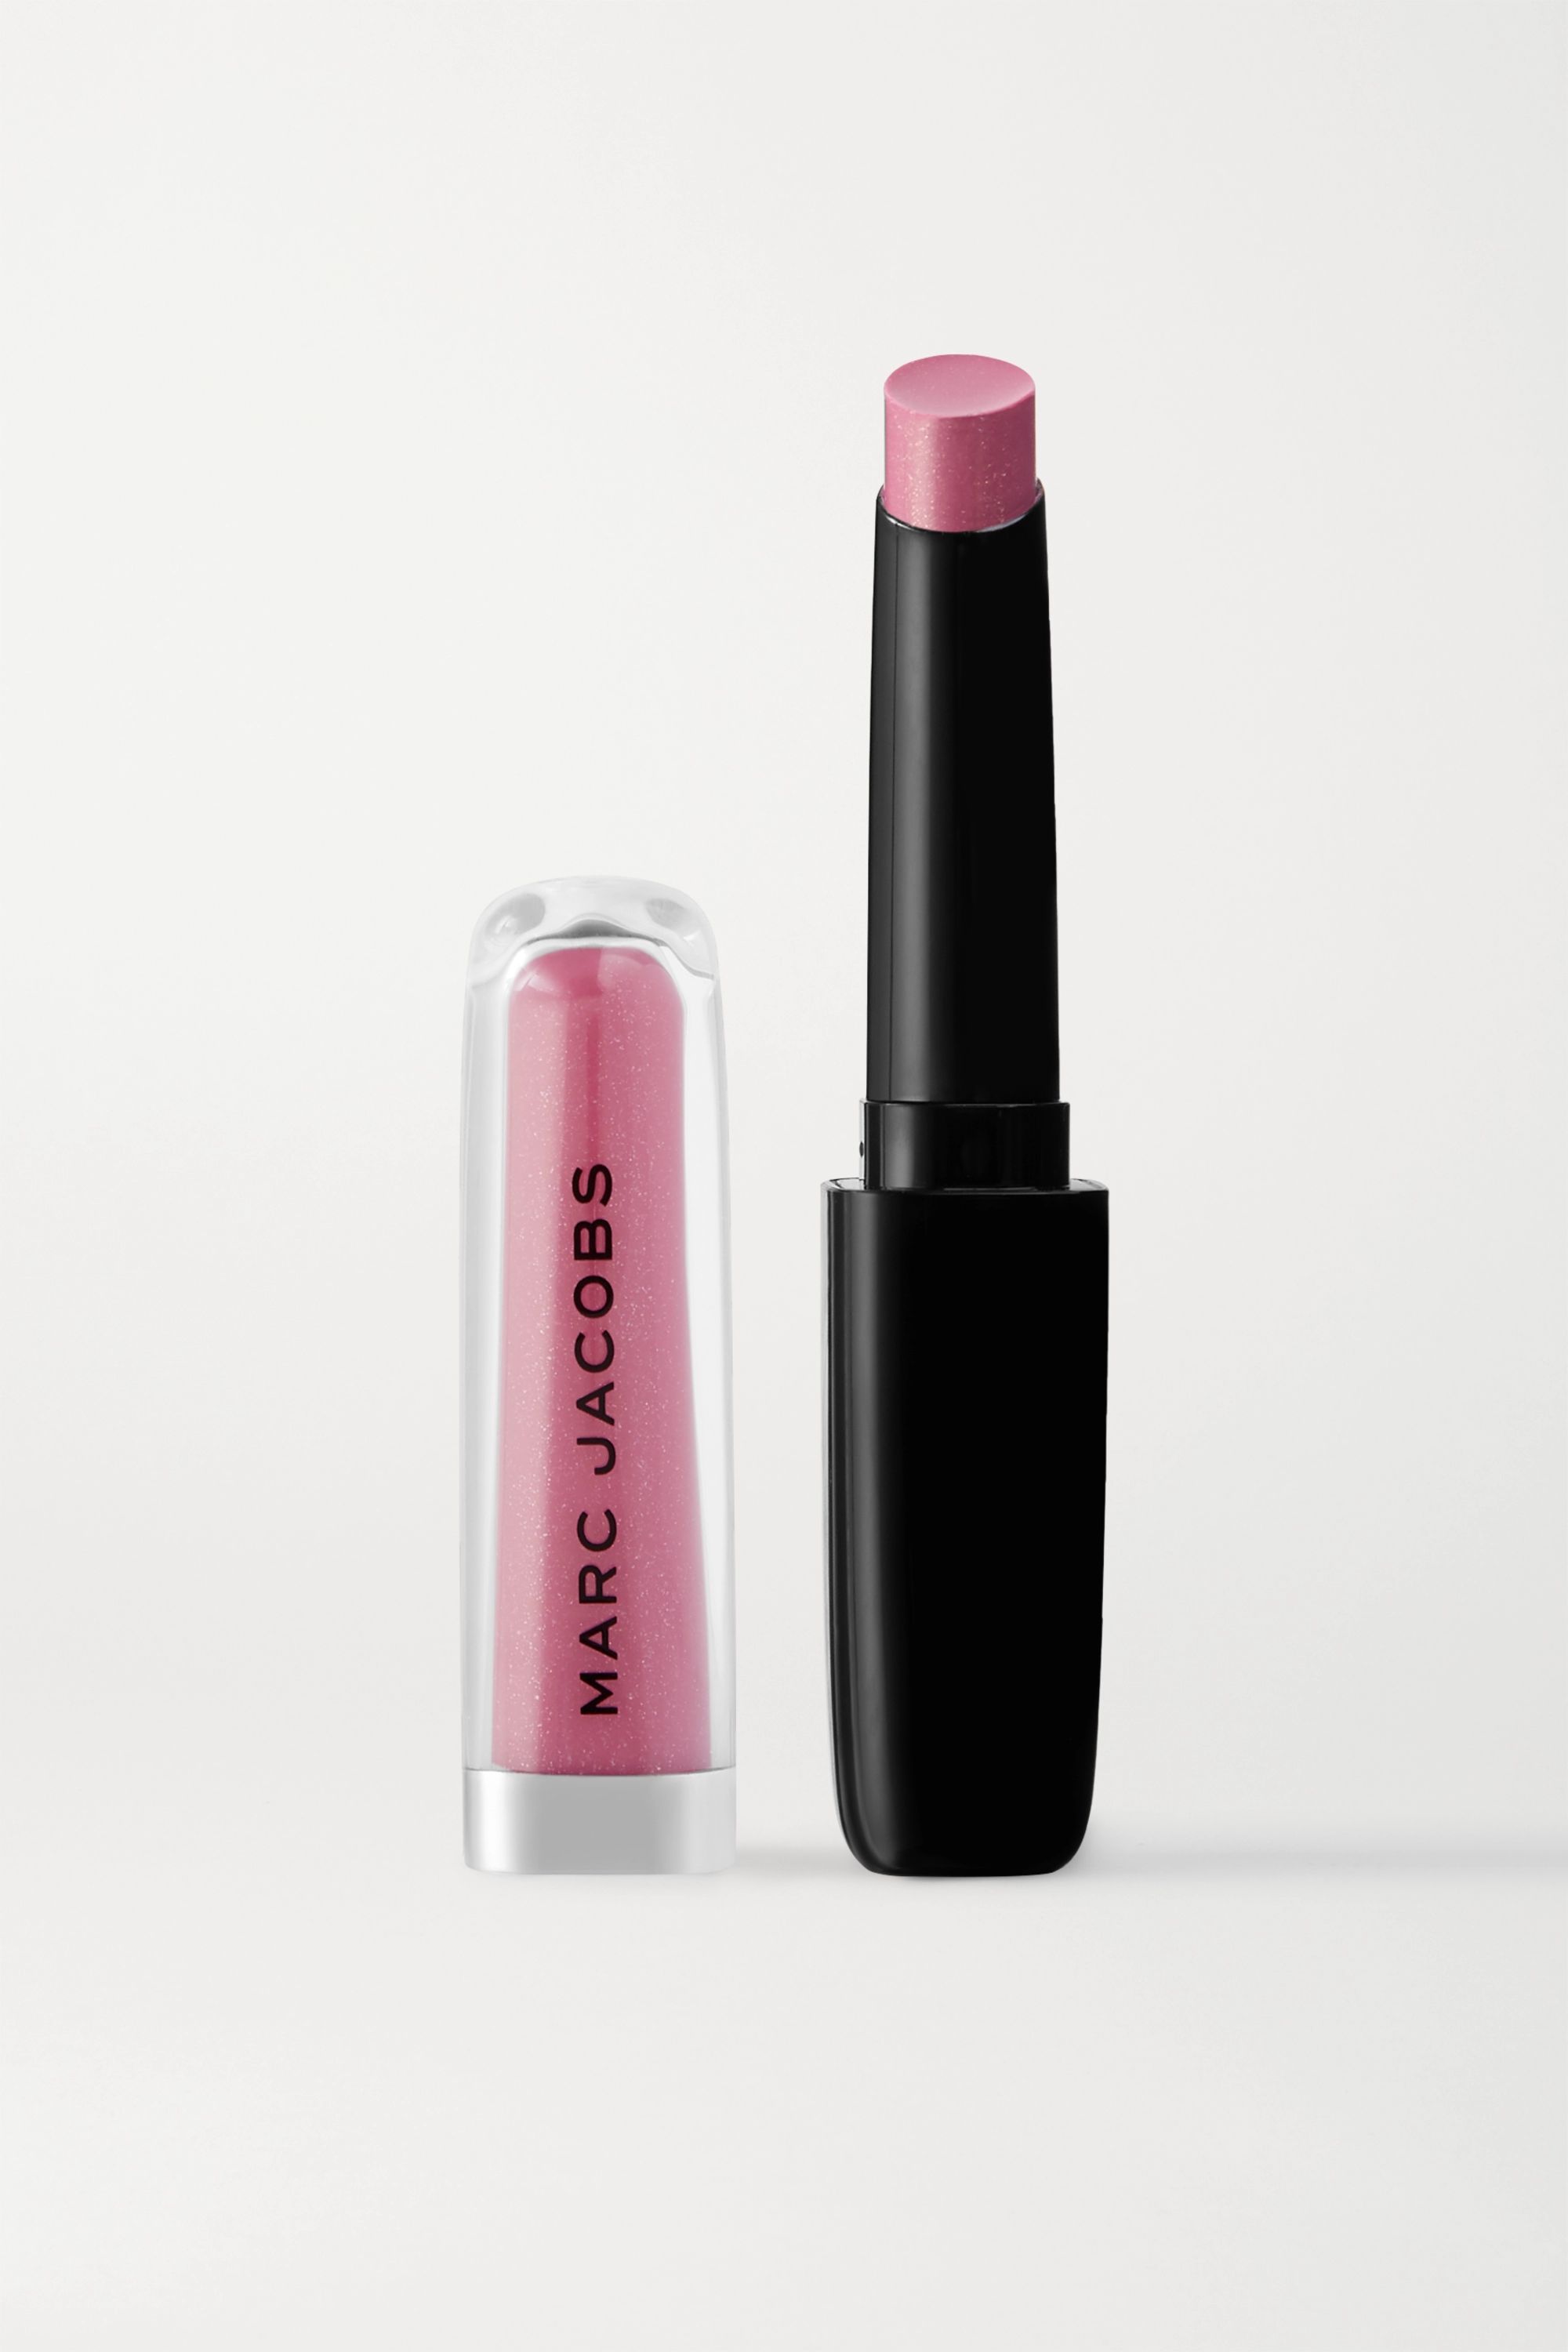 Enamored (With Pride) Hydrating Lip Gloss Stick - Coming Out 572 | NET-A-PORTER (US)